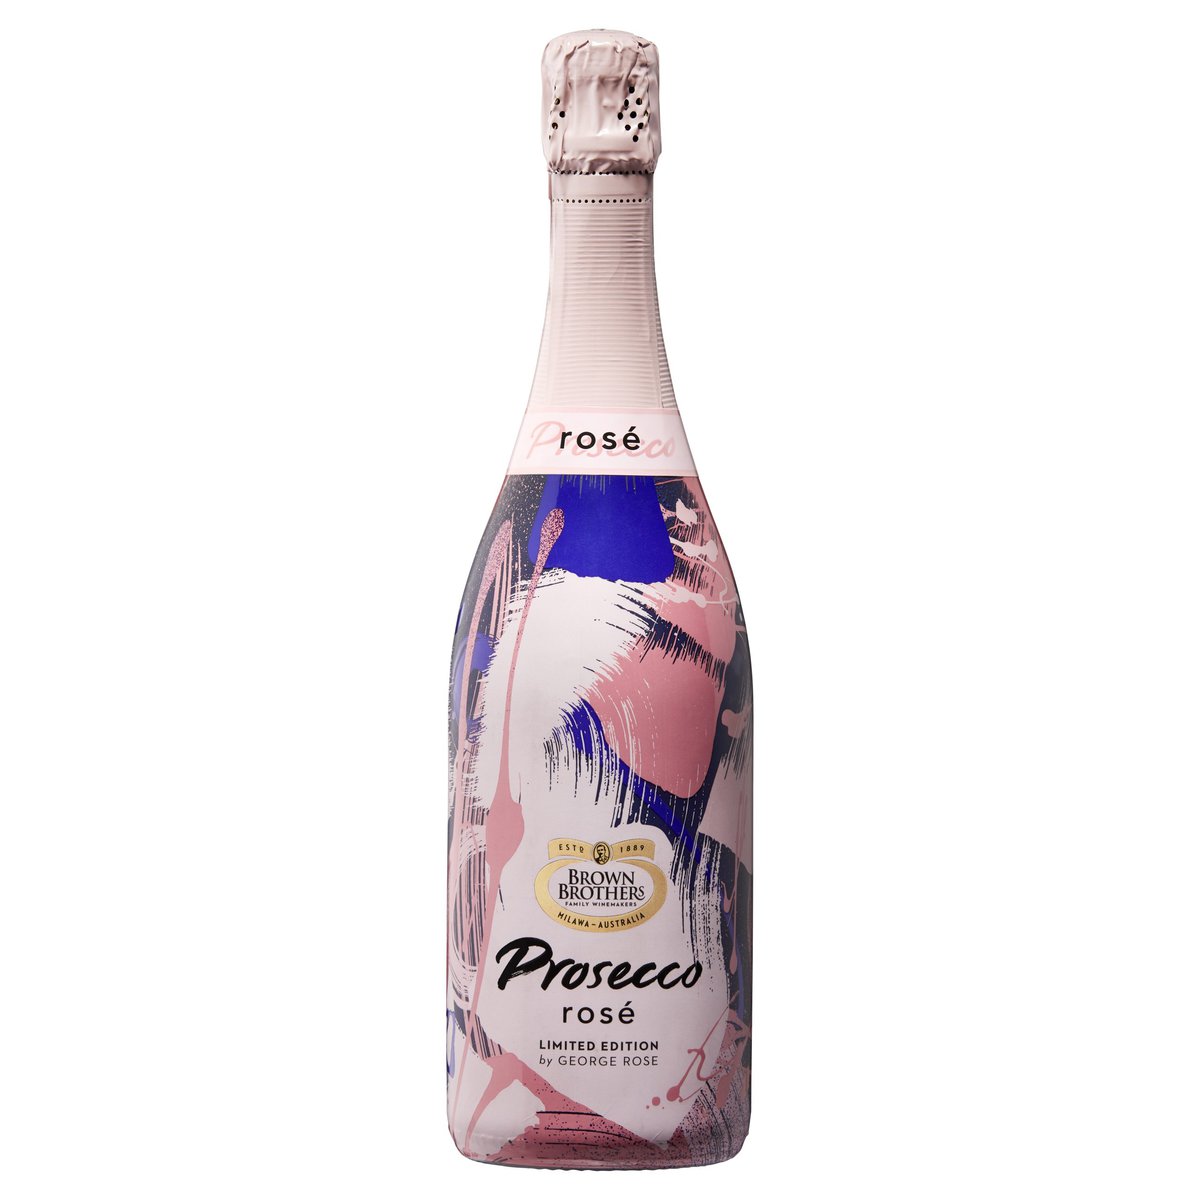 Brown brothers prosecco wine product photography